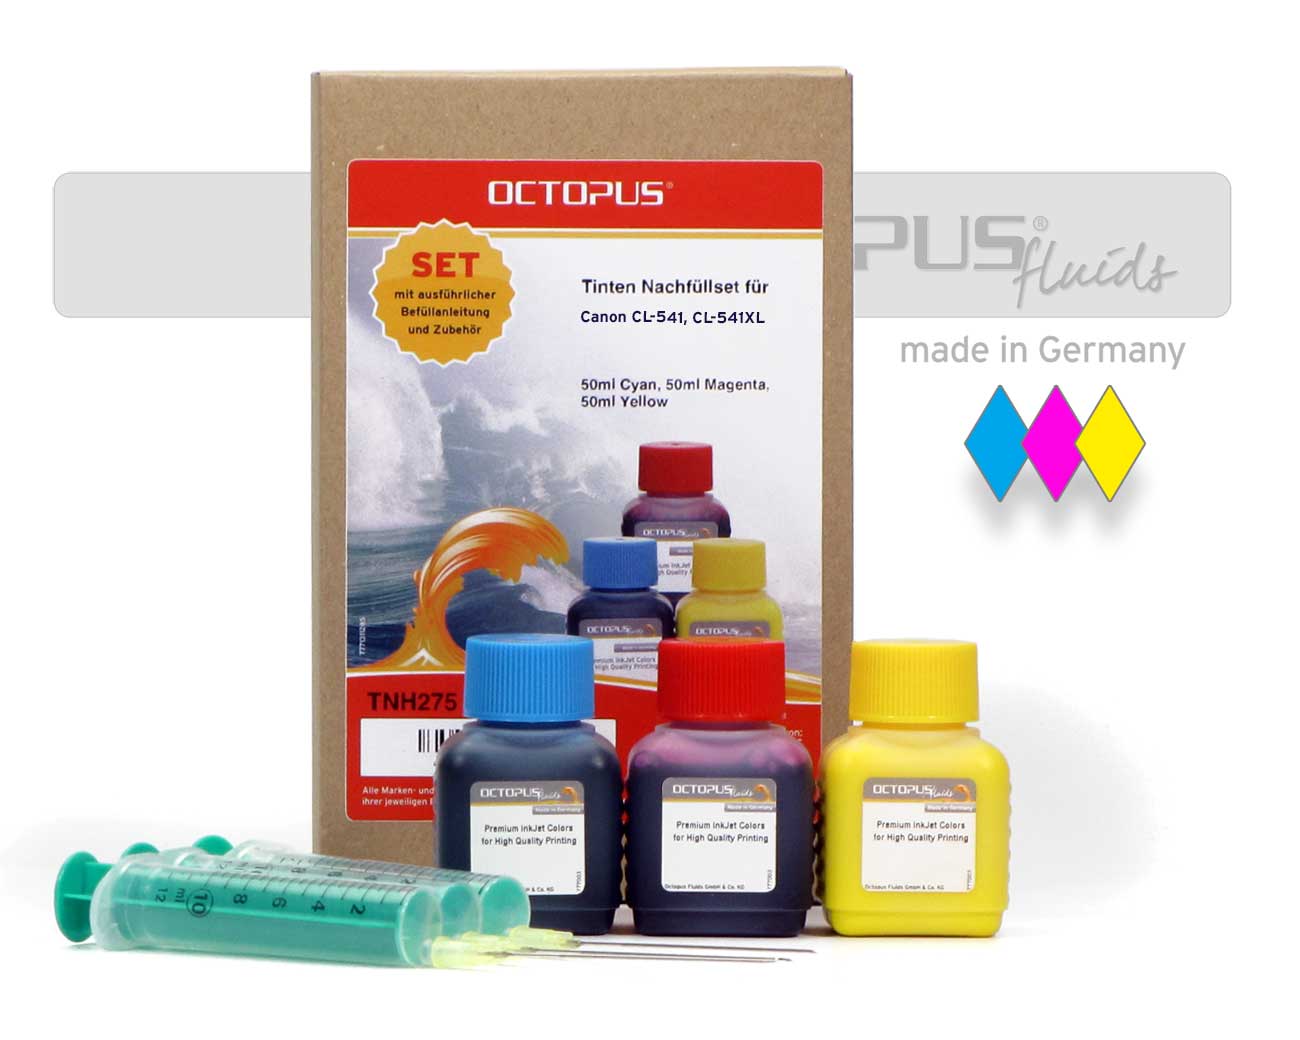 Ink Refill Kit for Canon CL-541, CL-541XL color